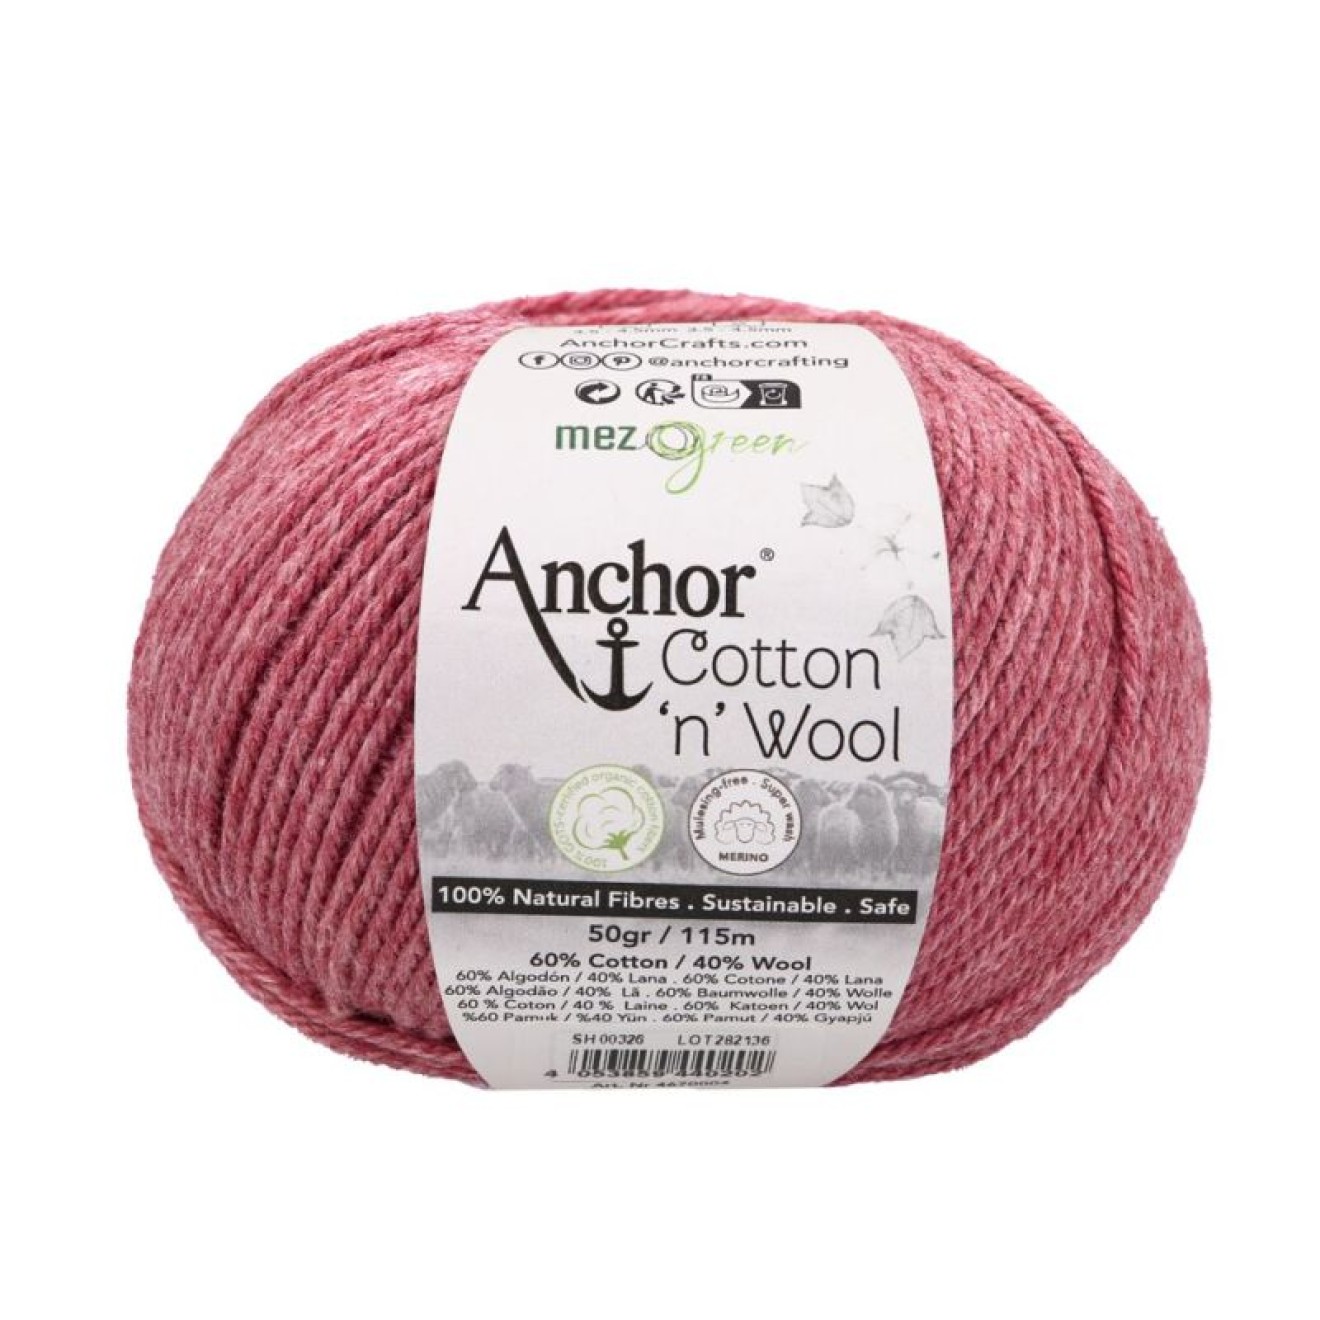 Anchor Cotton Wool